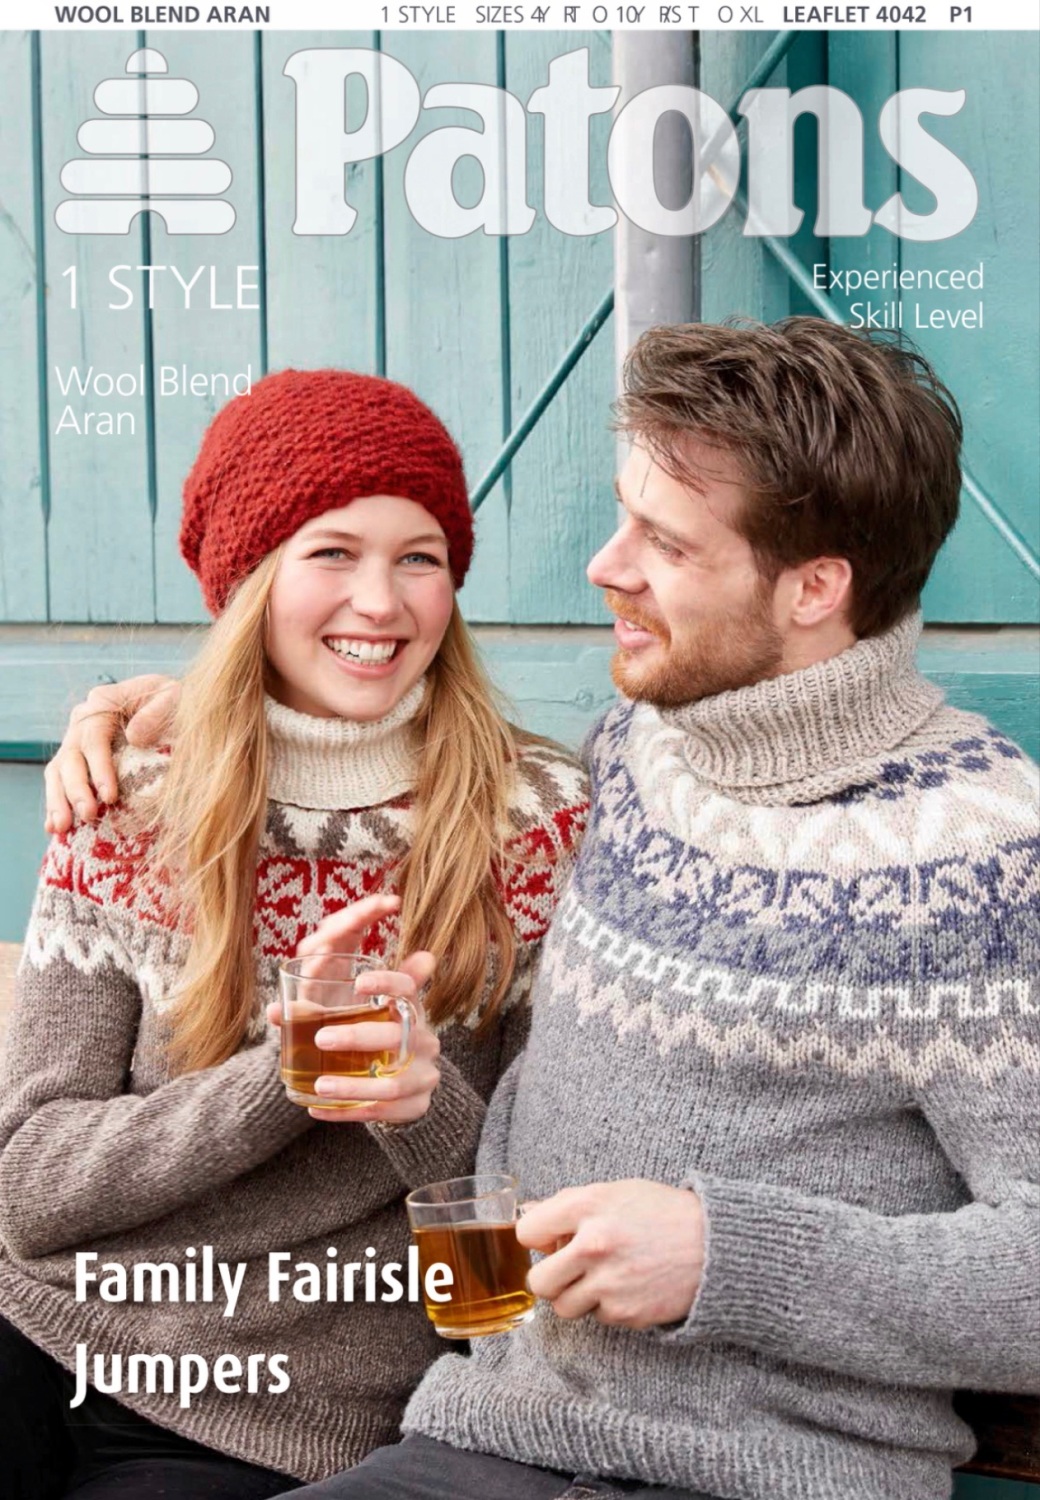 Patons Family Fair Isle Jumpers. 1 Style in Wool Blend Aran. Leaflet 3916. 